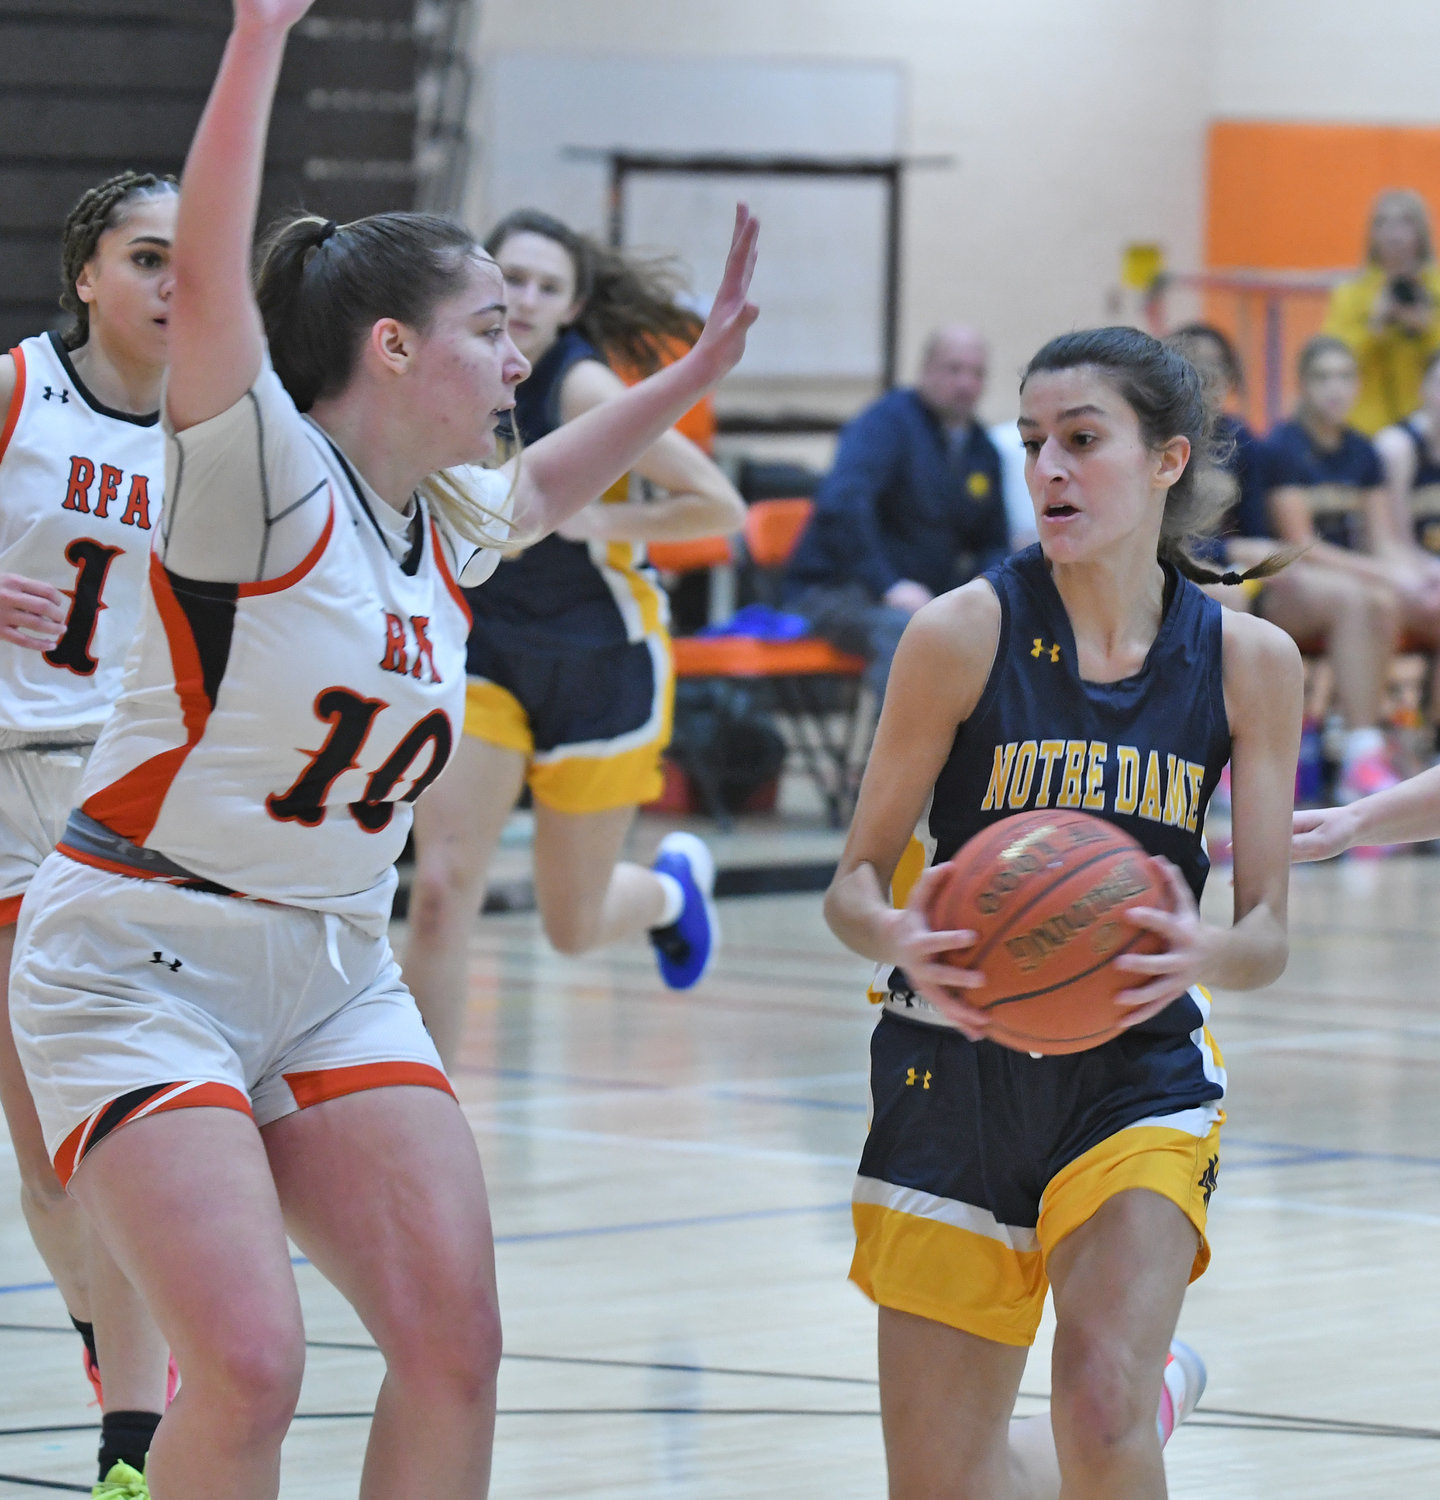 Alexa Durso of Utica-Notre Dame drives on Rome Free Academy defender Raelyn Dole Tuesday night at RFA. The Black Knights won at home 62-54.